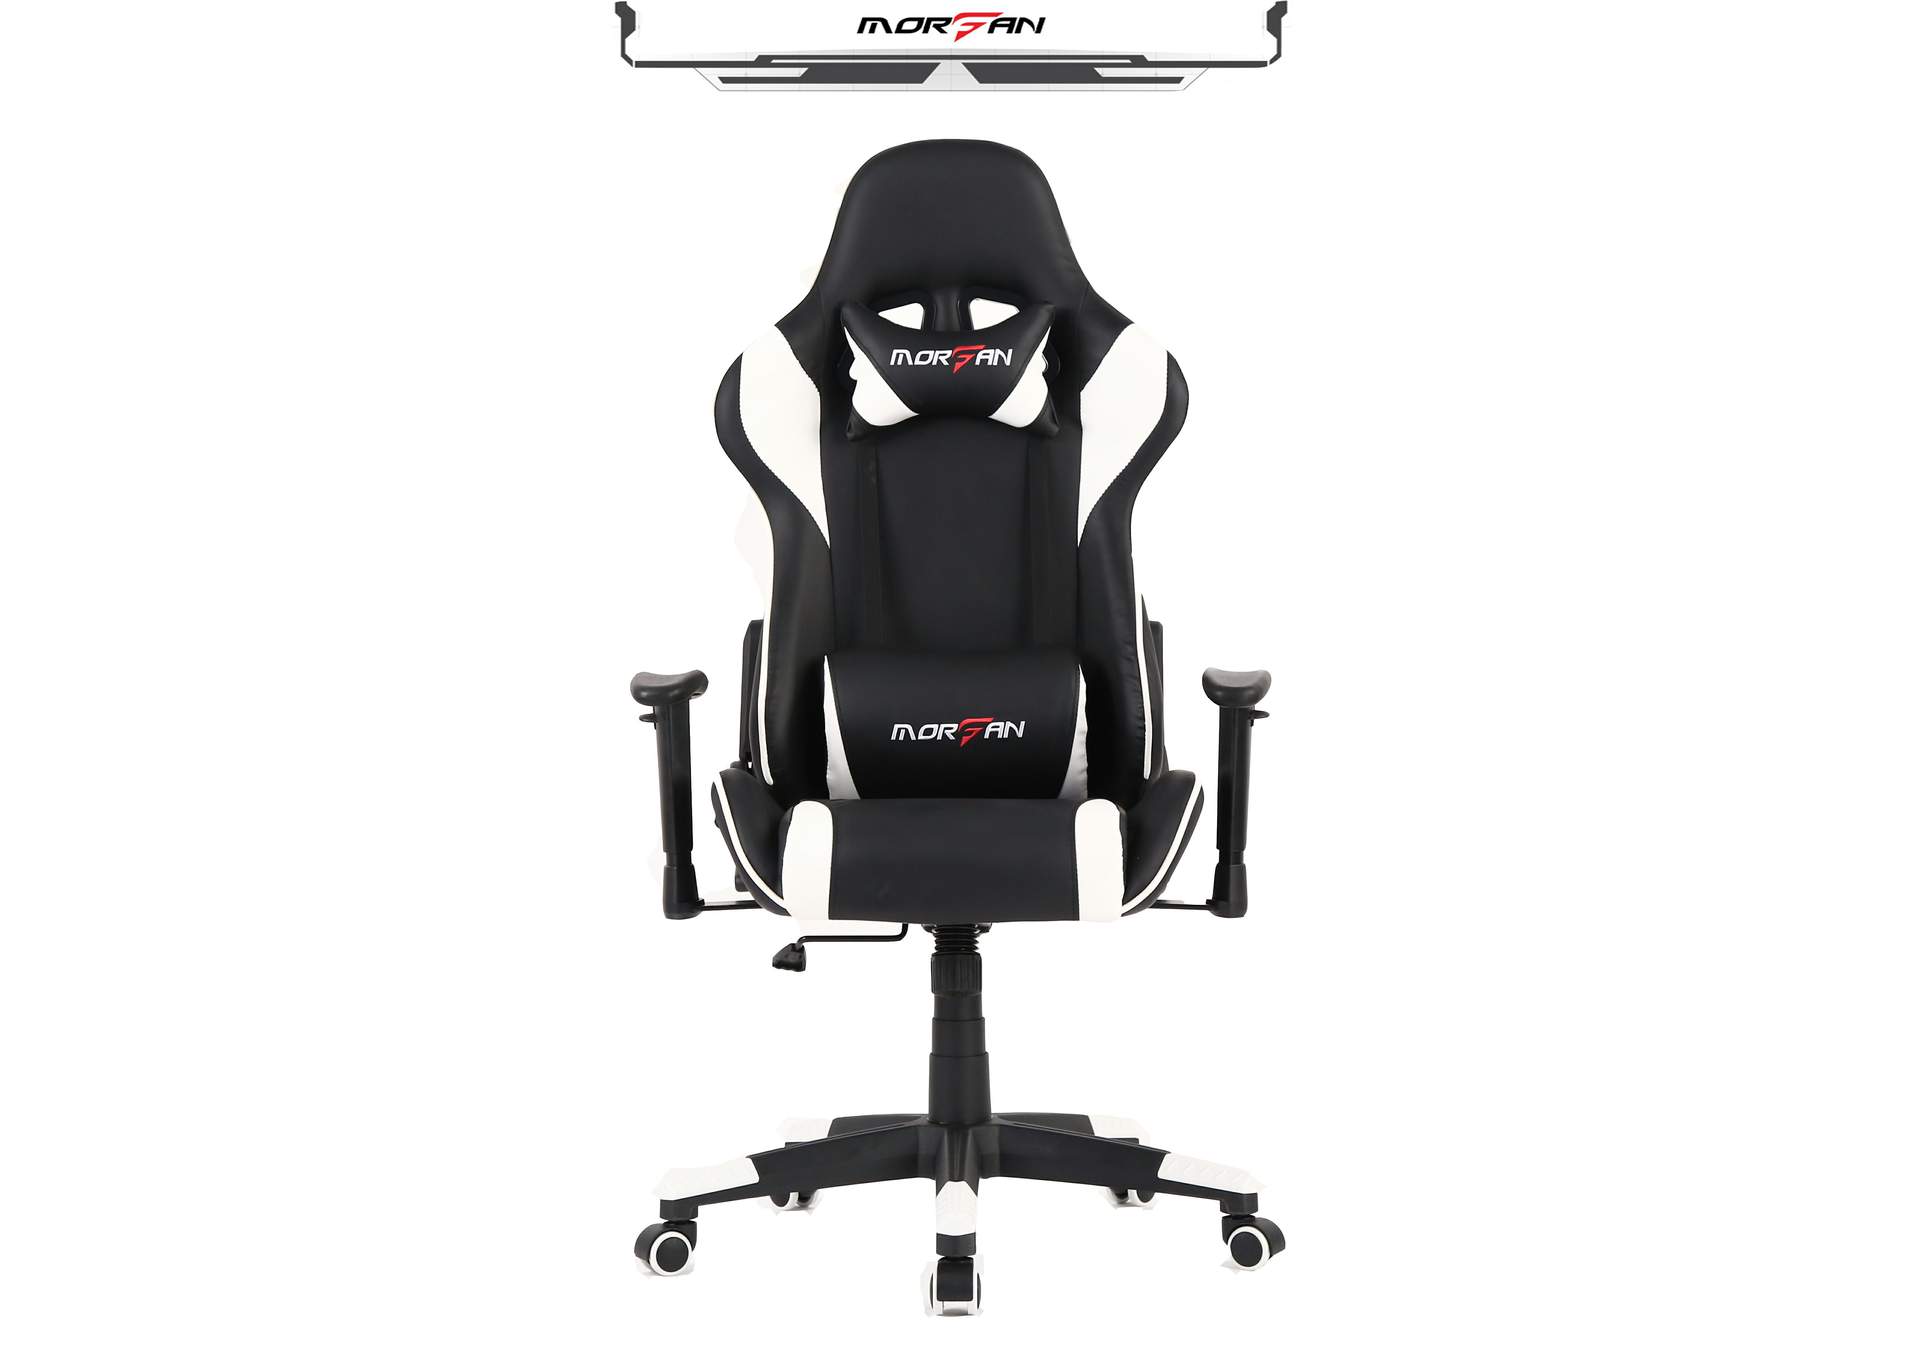 G005Bw Game Chair,Global Trading